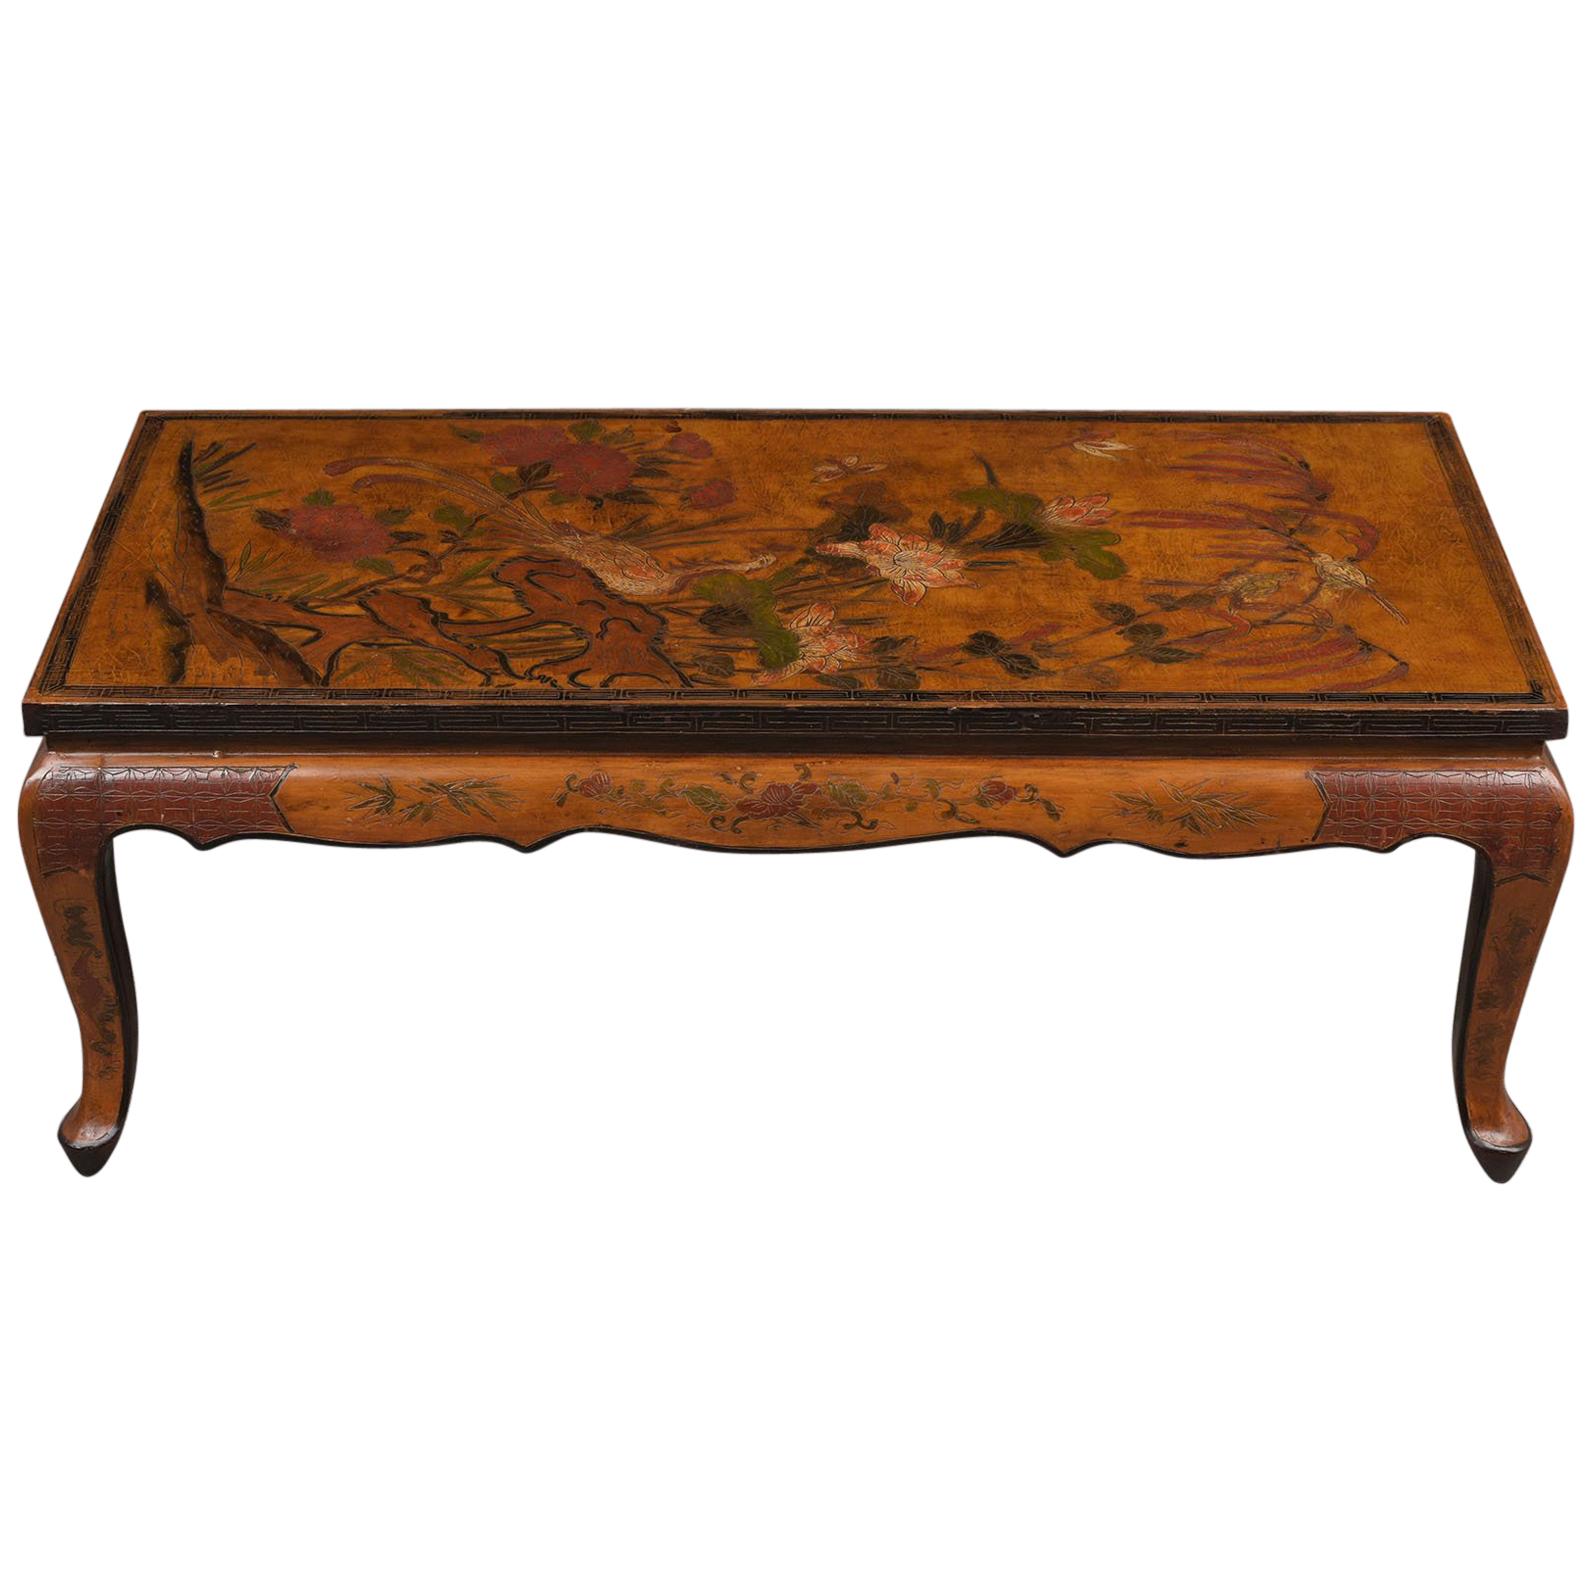 Unique French Chinoiserie Painted Low Coffee Table